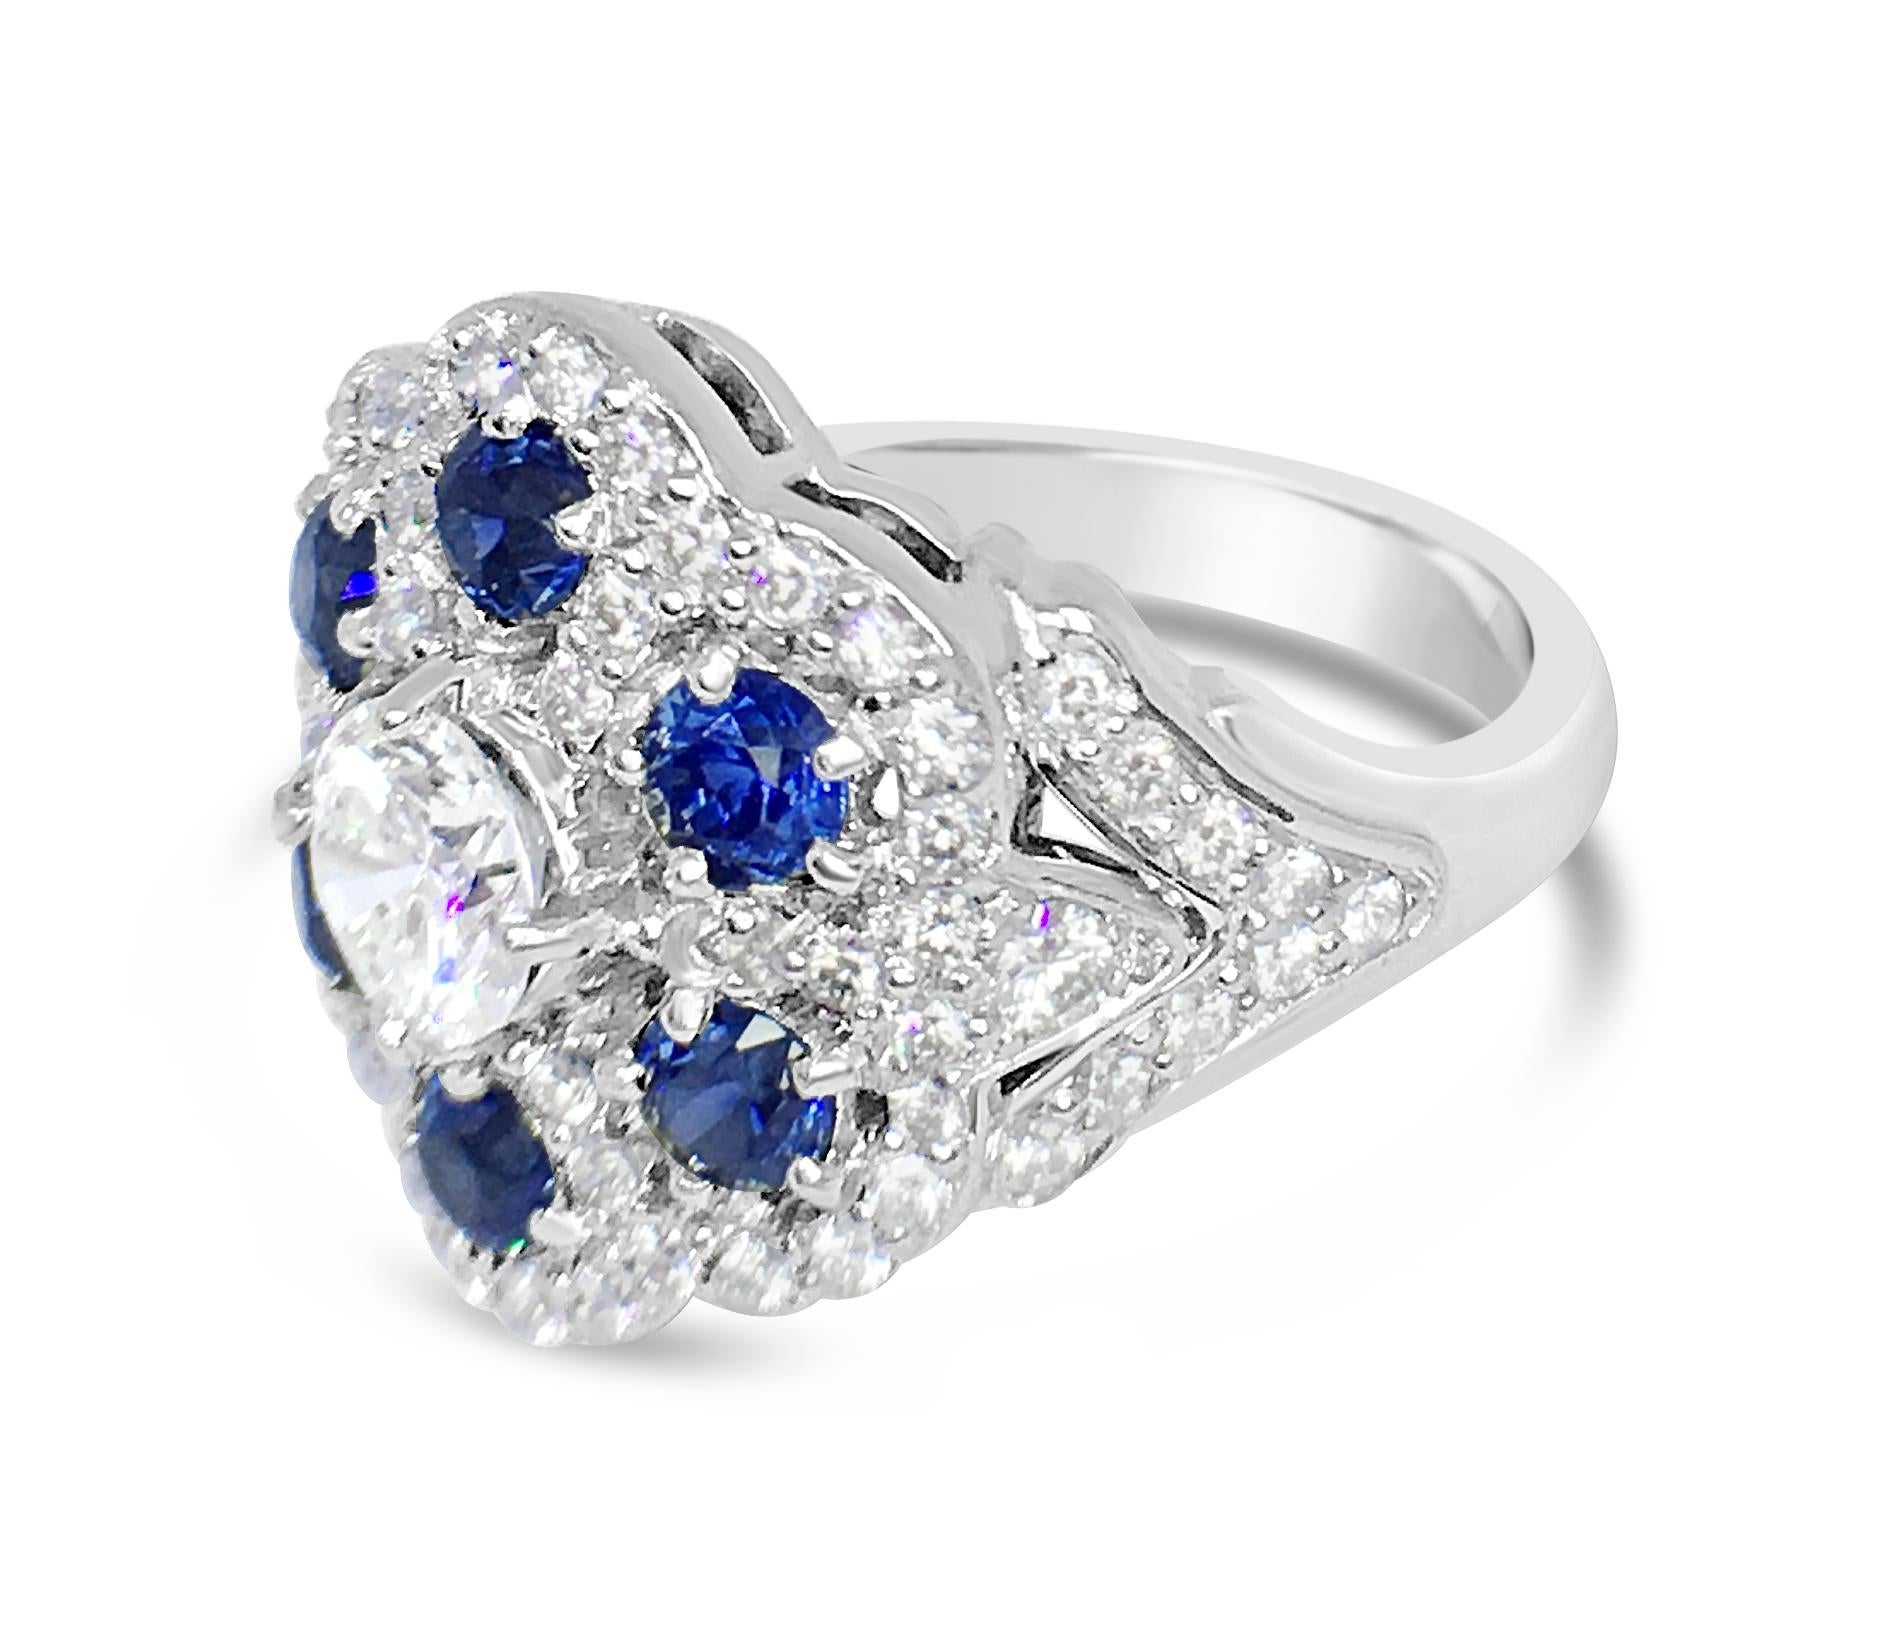 A beautiful and delicate 18 karat white gold ring set with a center diamond of 0.61 carats H color and VS clarity surrounded by 1.22 carats total of blue sapphires and another 0.69 carats total weight of diamond pave.  The ring is a size 6.5 and is